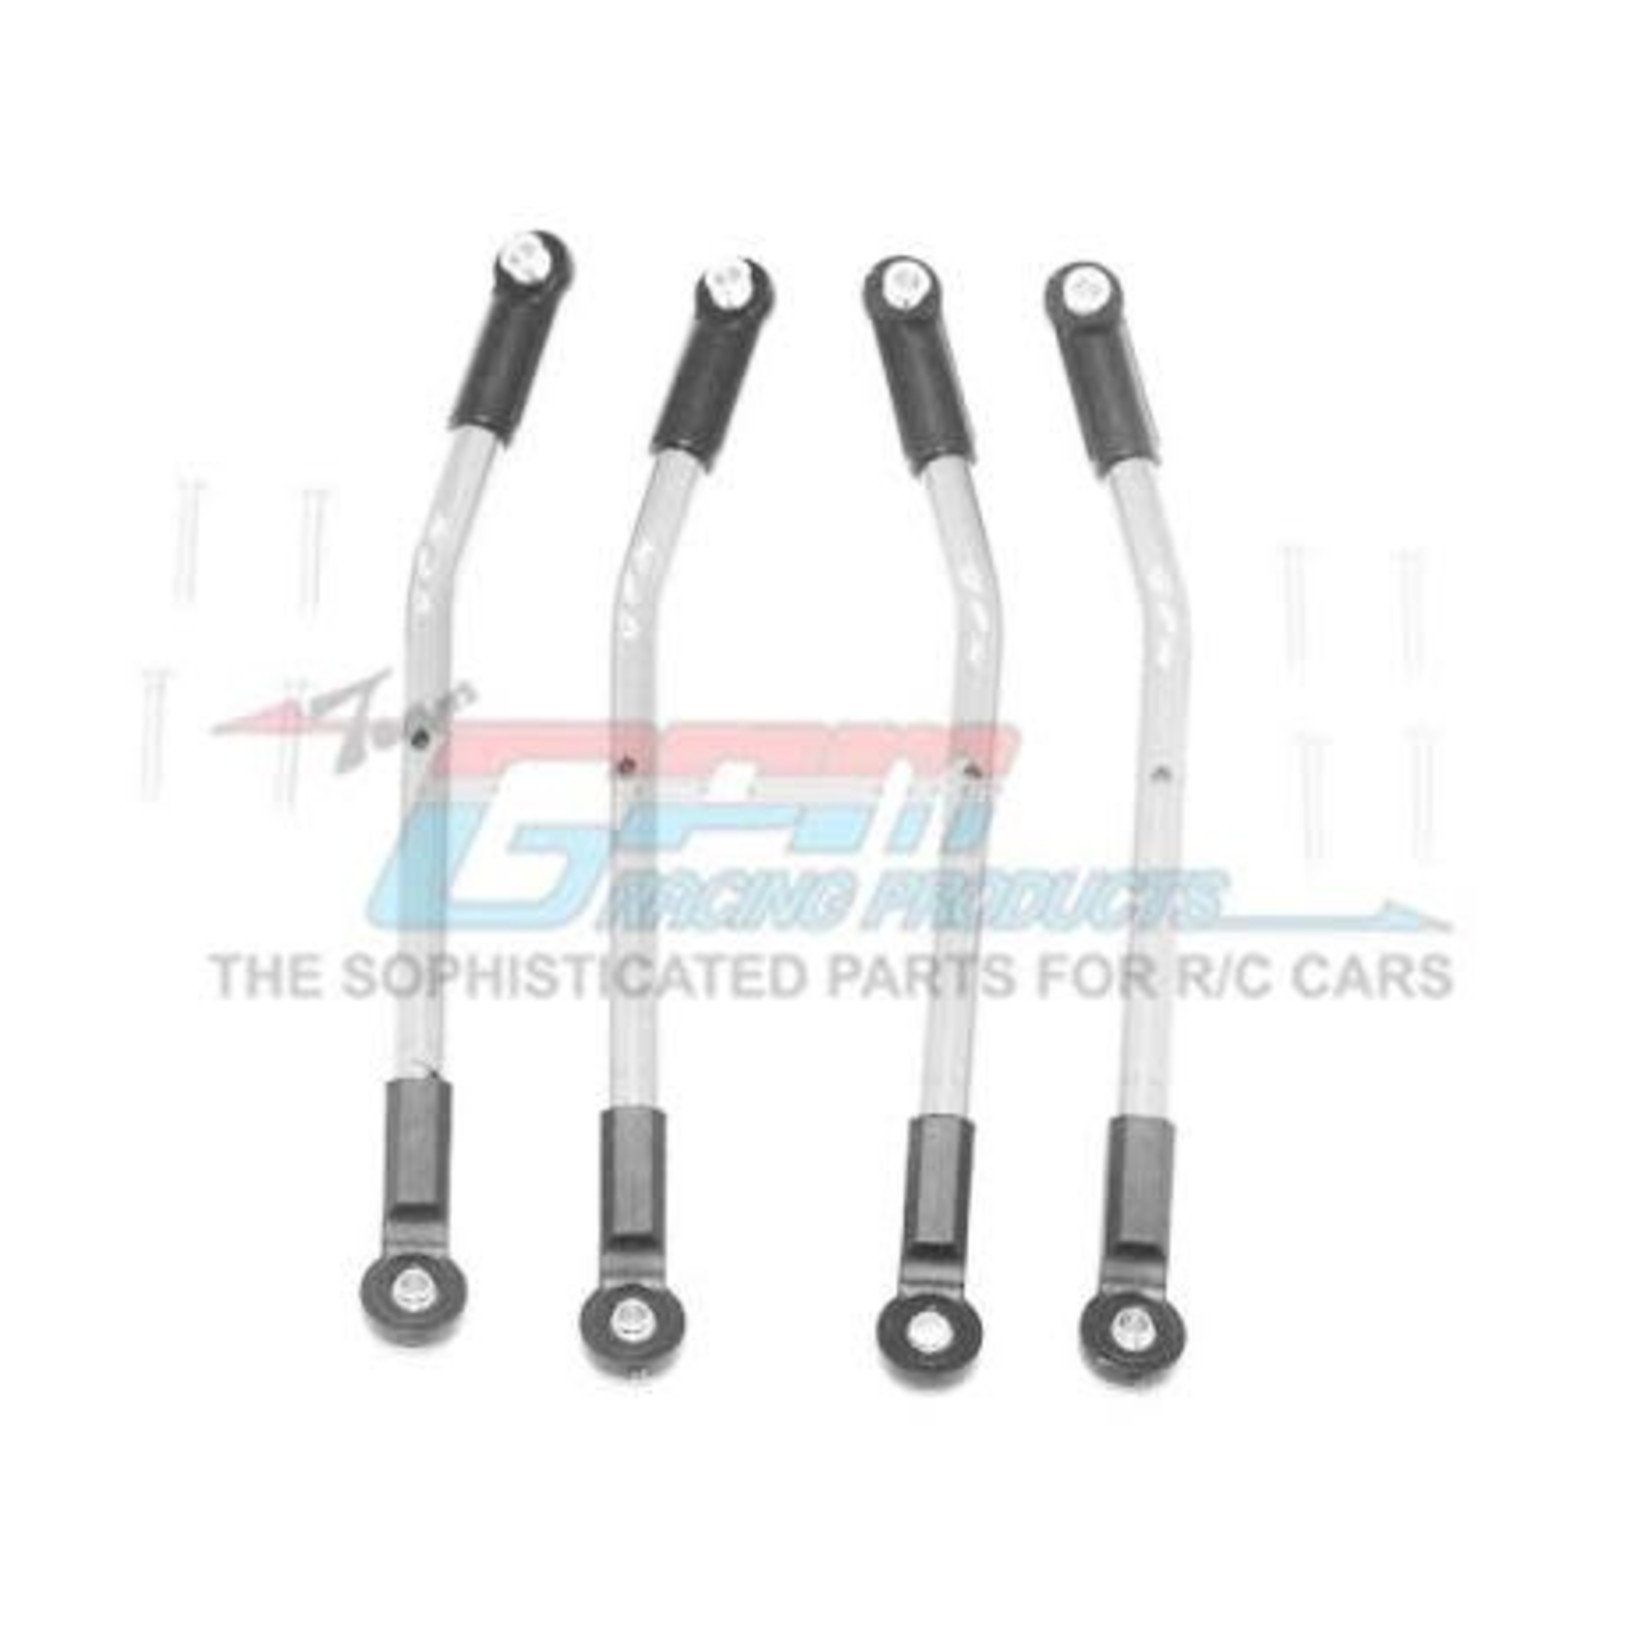 GPM Racing GPM Racing HPI Venture Aluminium Adjustable Suspension Links (12) (Silver) #VEN160A-GS